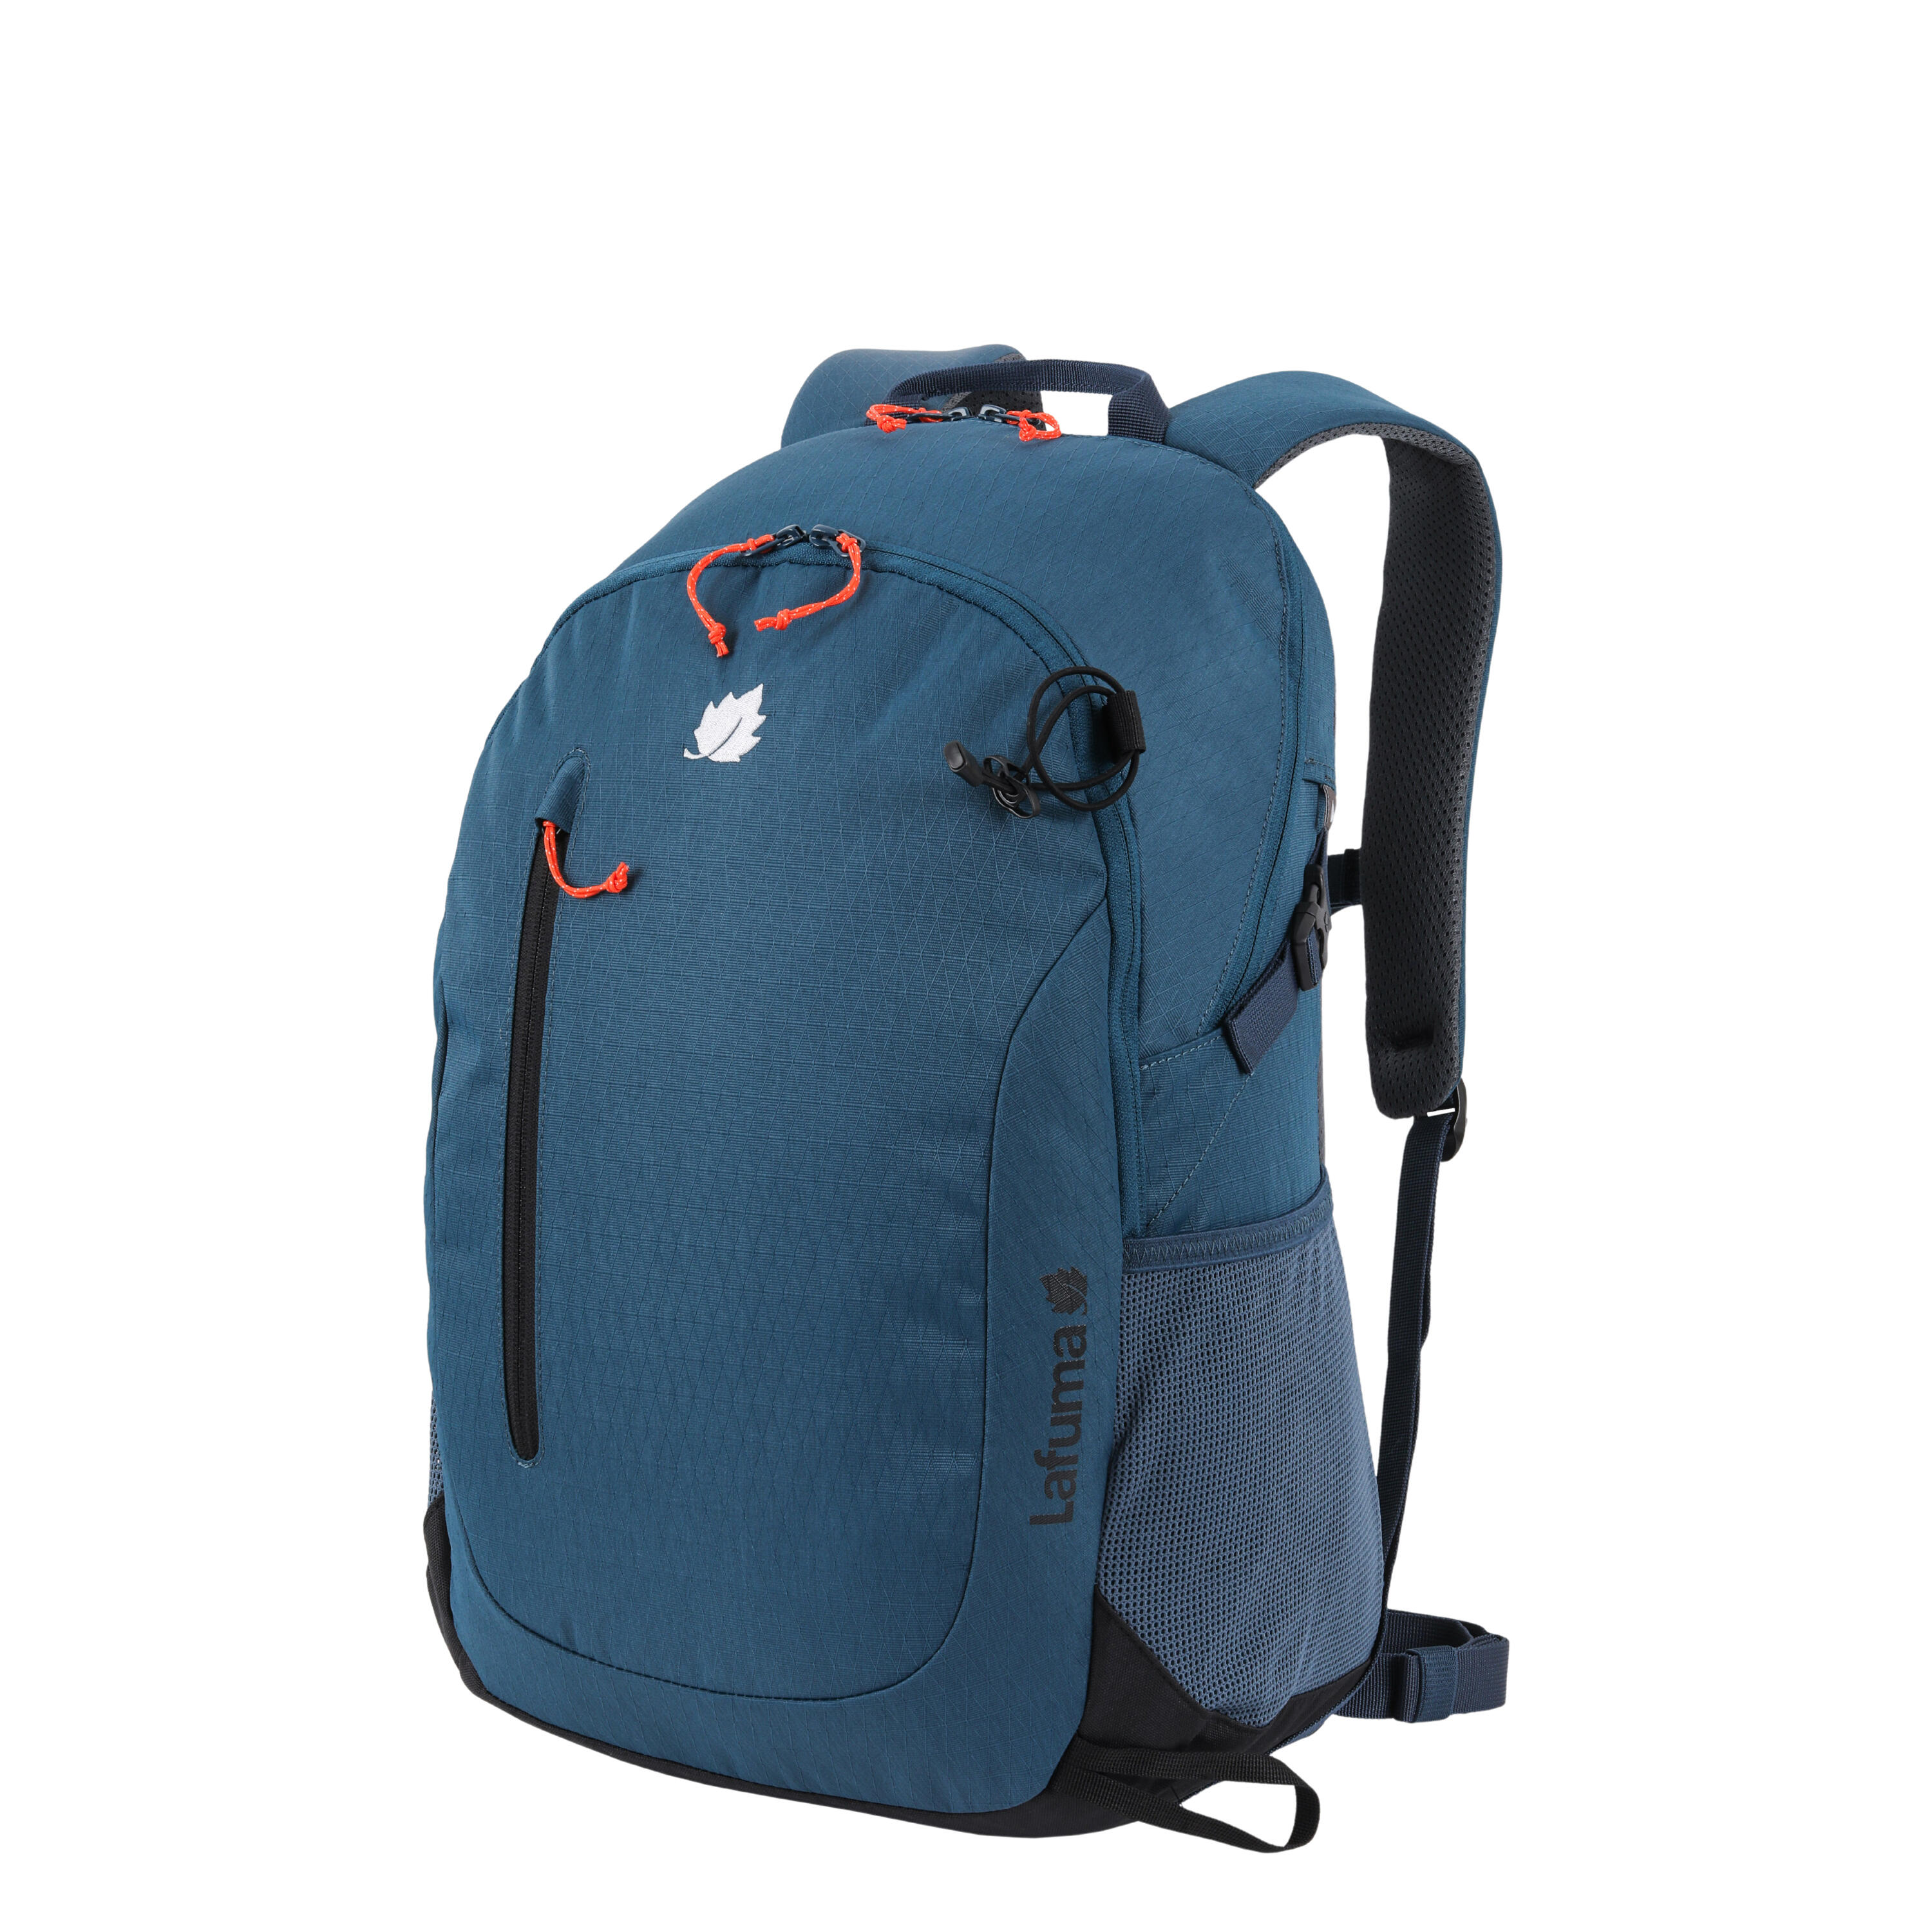 Lafuma - Active 18 - Women's and Men's Backpack for Hiking, Travel and  Nordic Walking - Volume of 18 L - Blue : Amazon.de: Sports & Outdoors